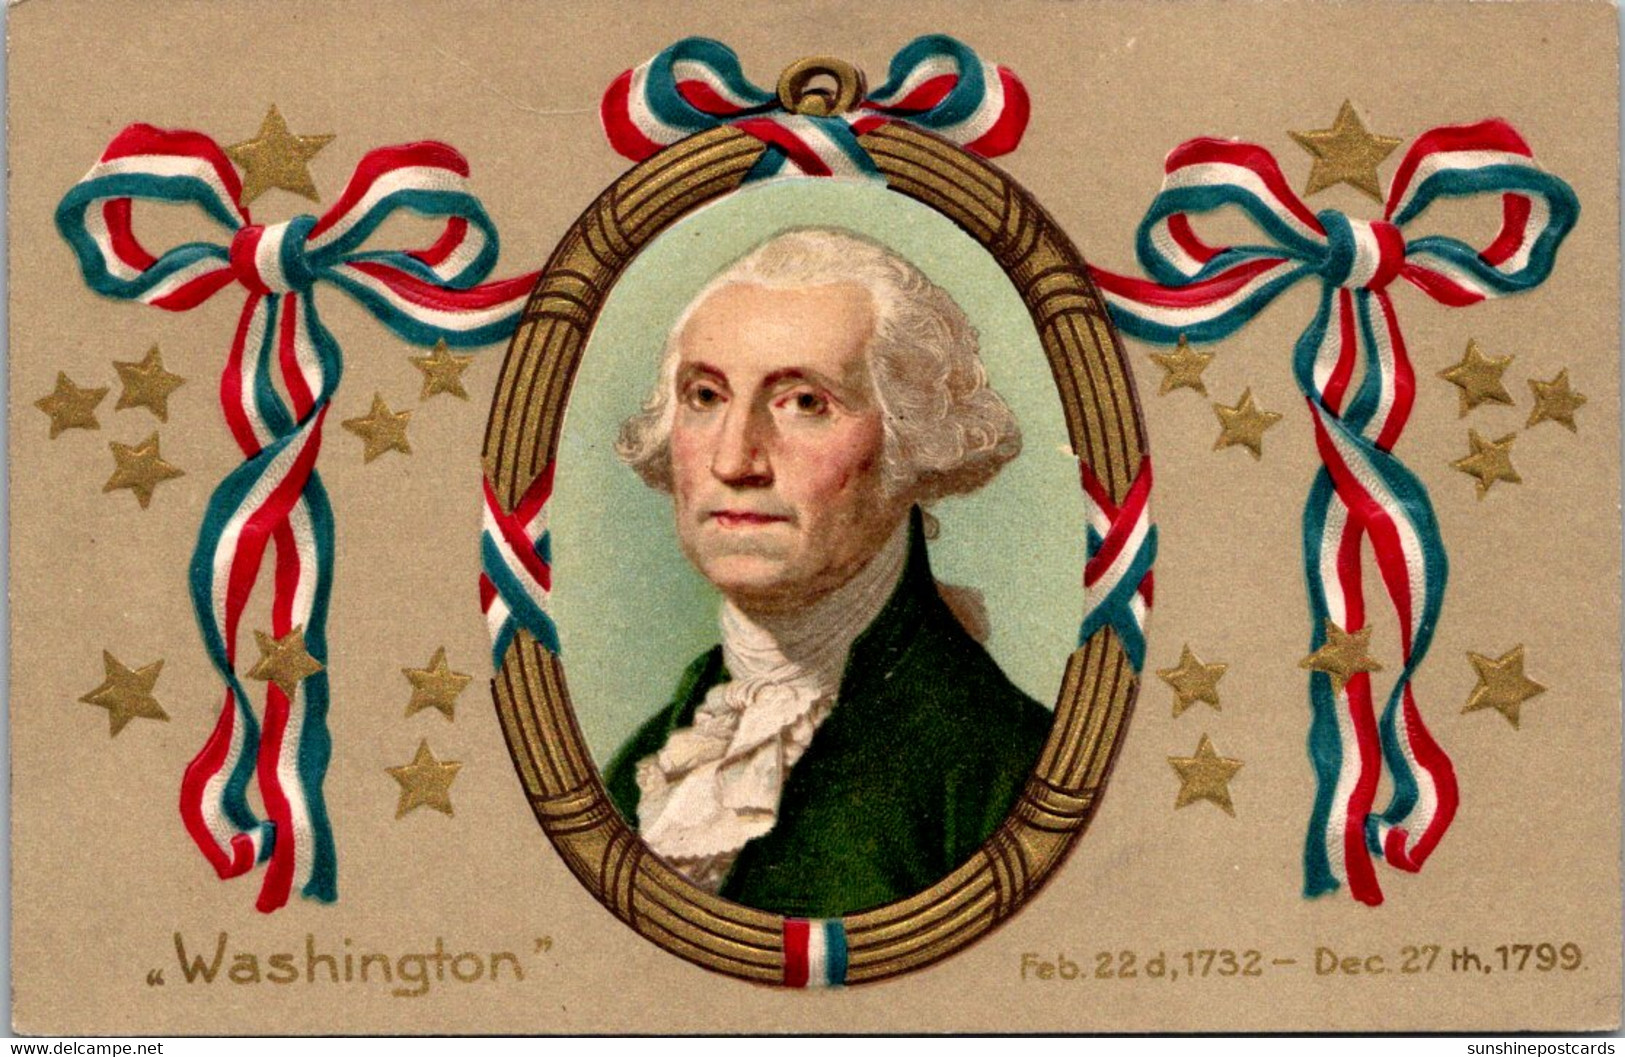 George Washington With Red White & Blue Ribbons Embossed - Presidents